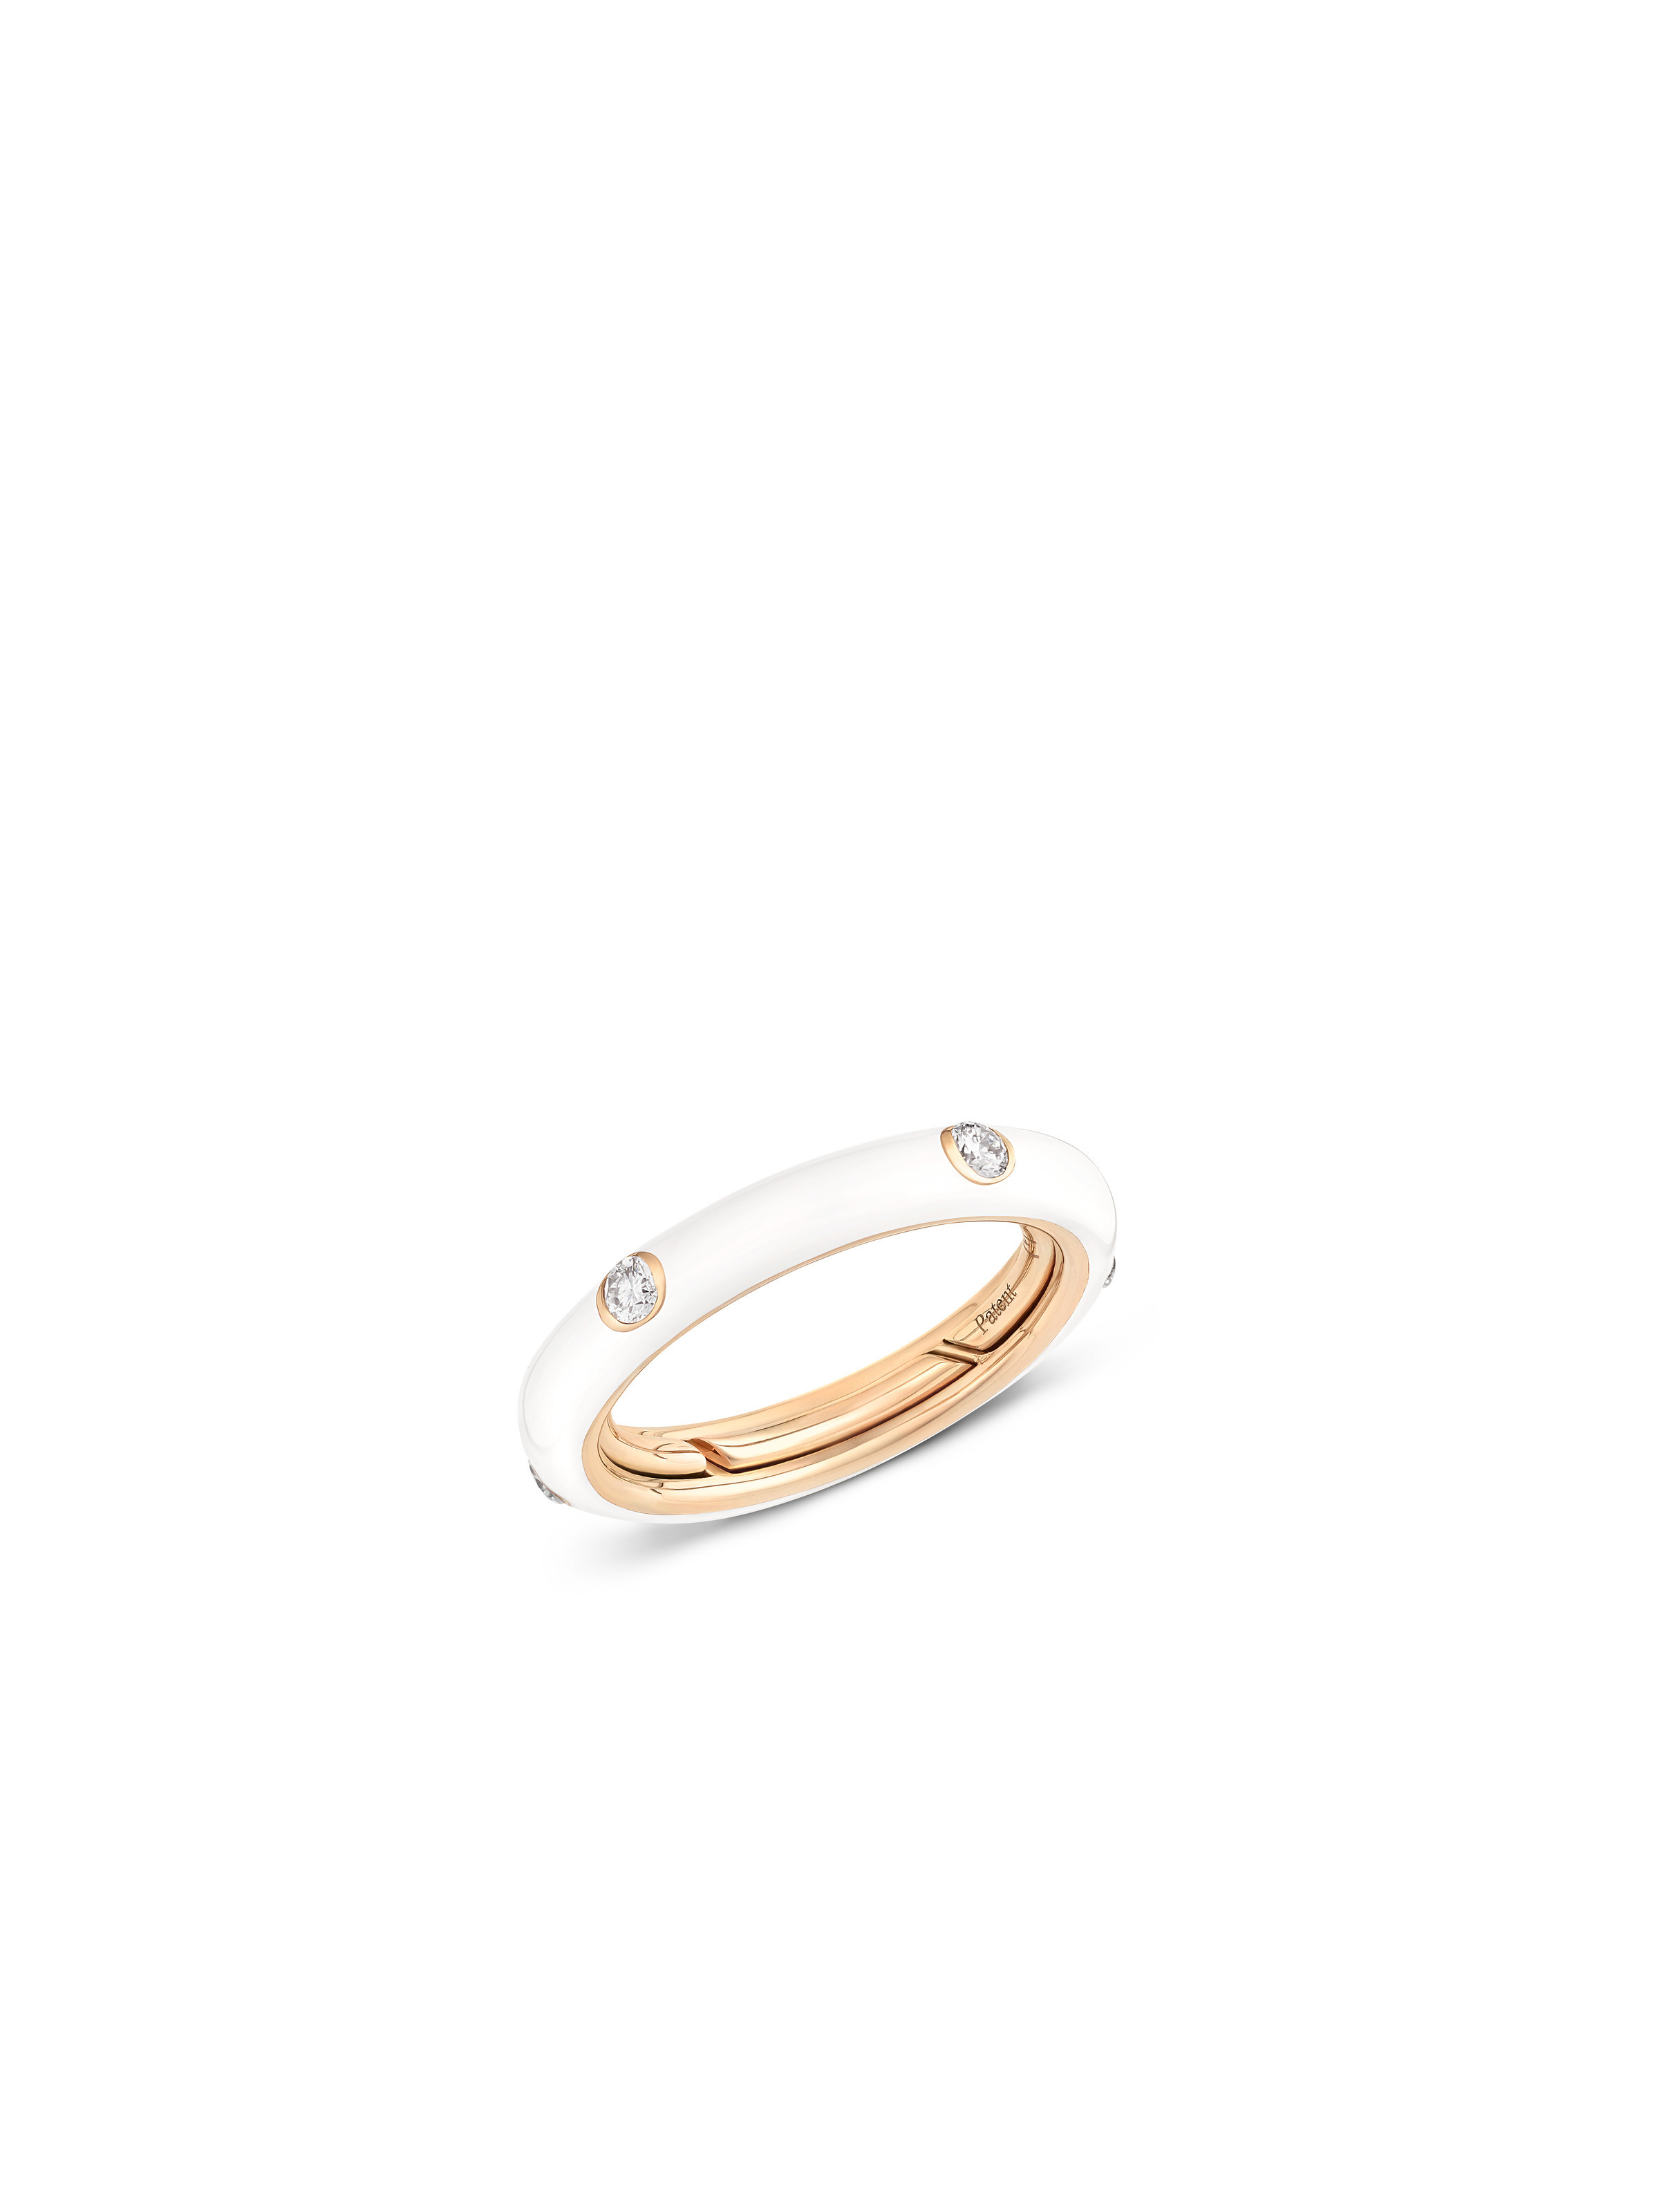 Pop Collection White ring | Adolfo Courrier | Wempe Jewelers